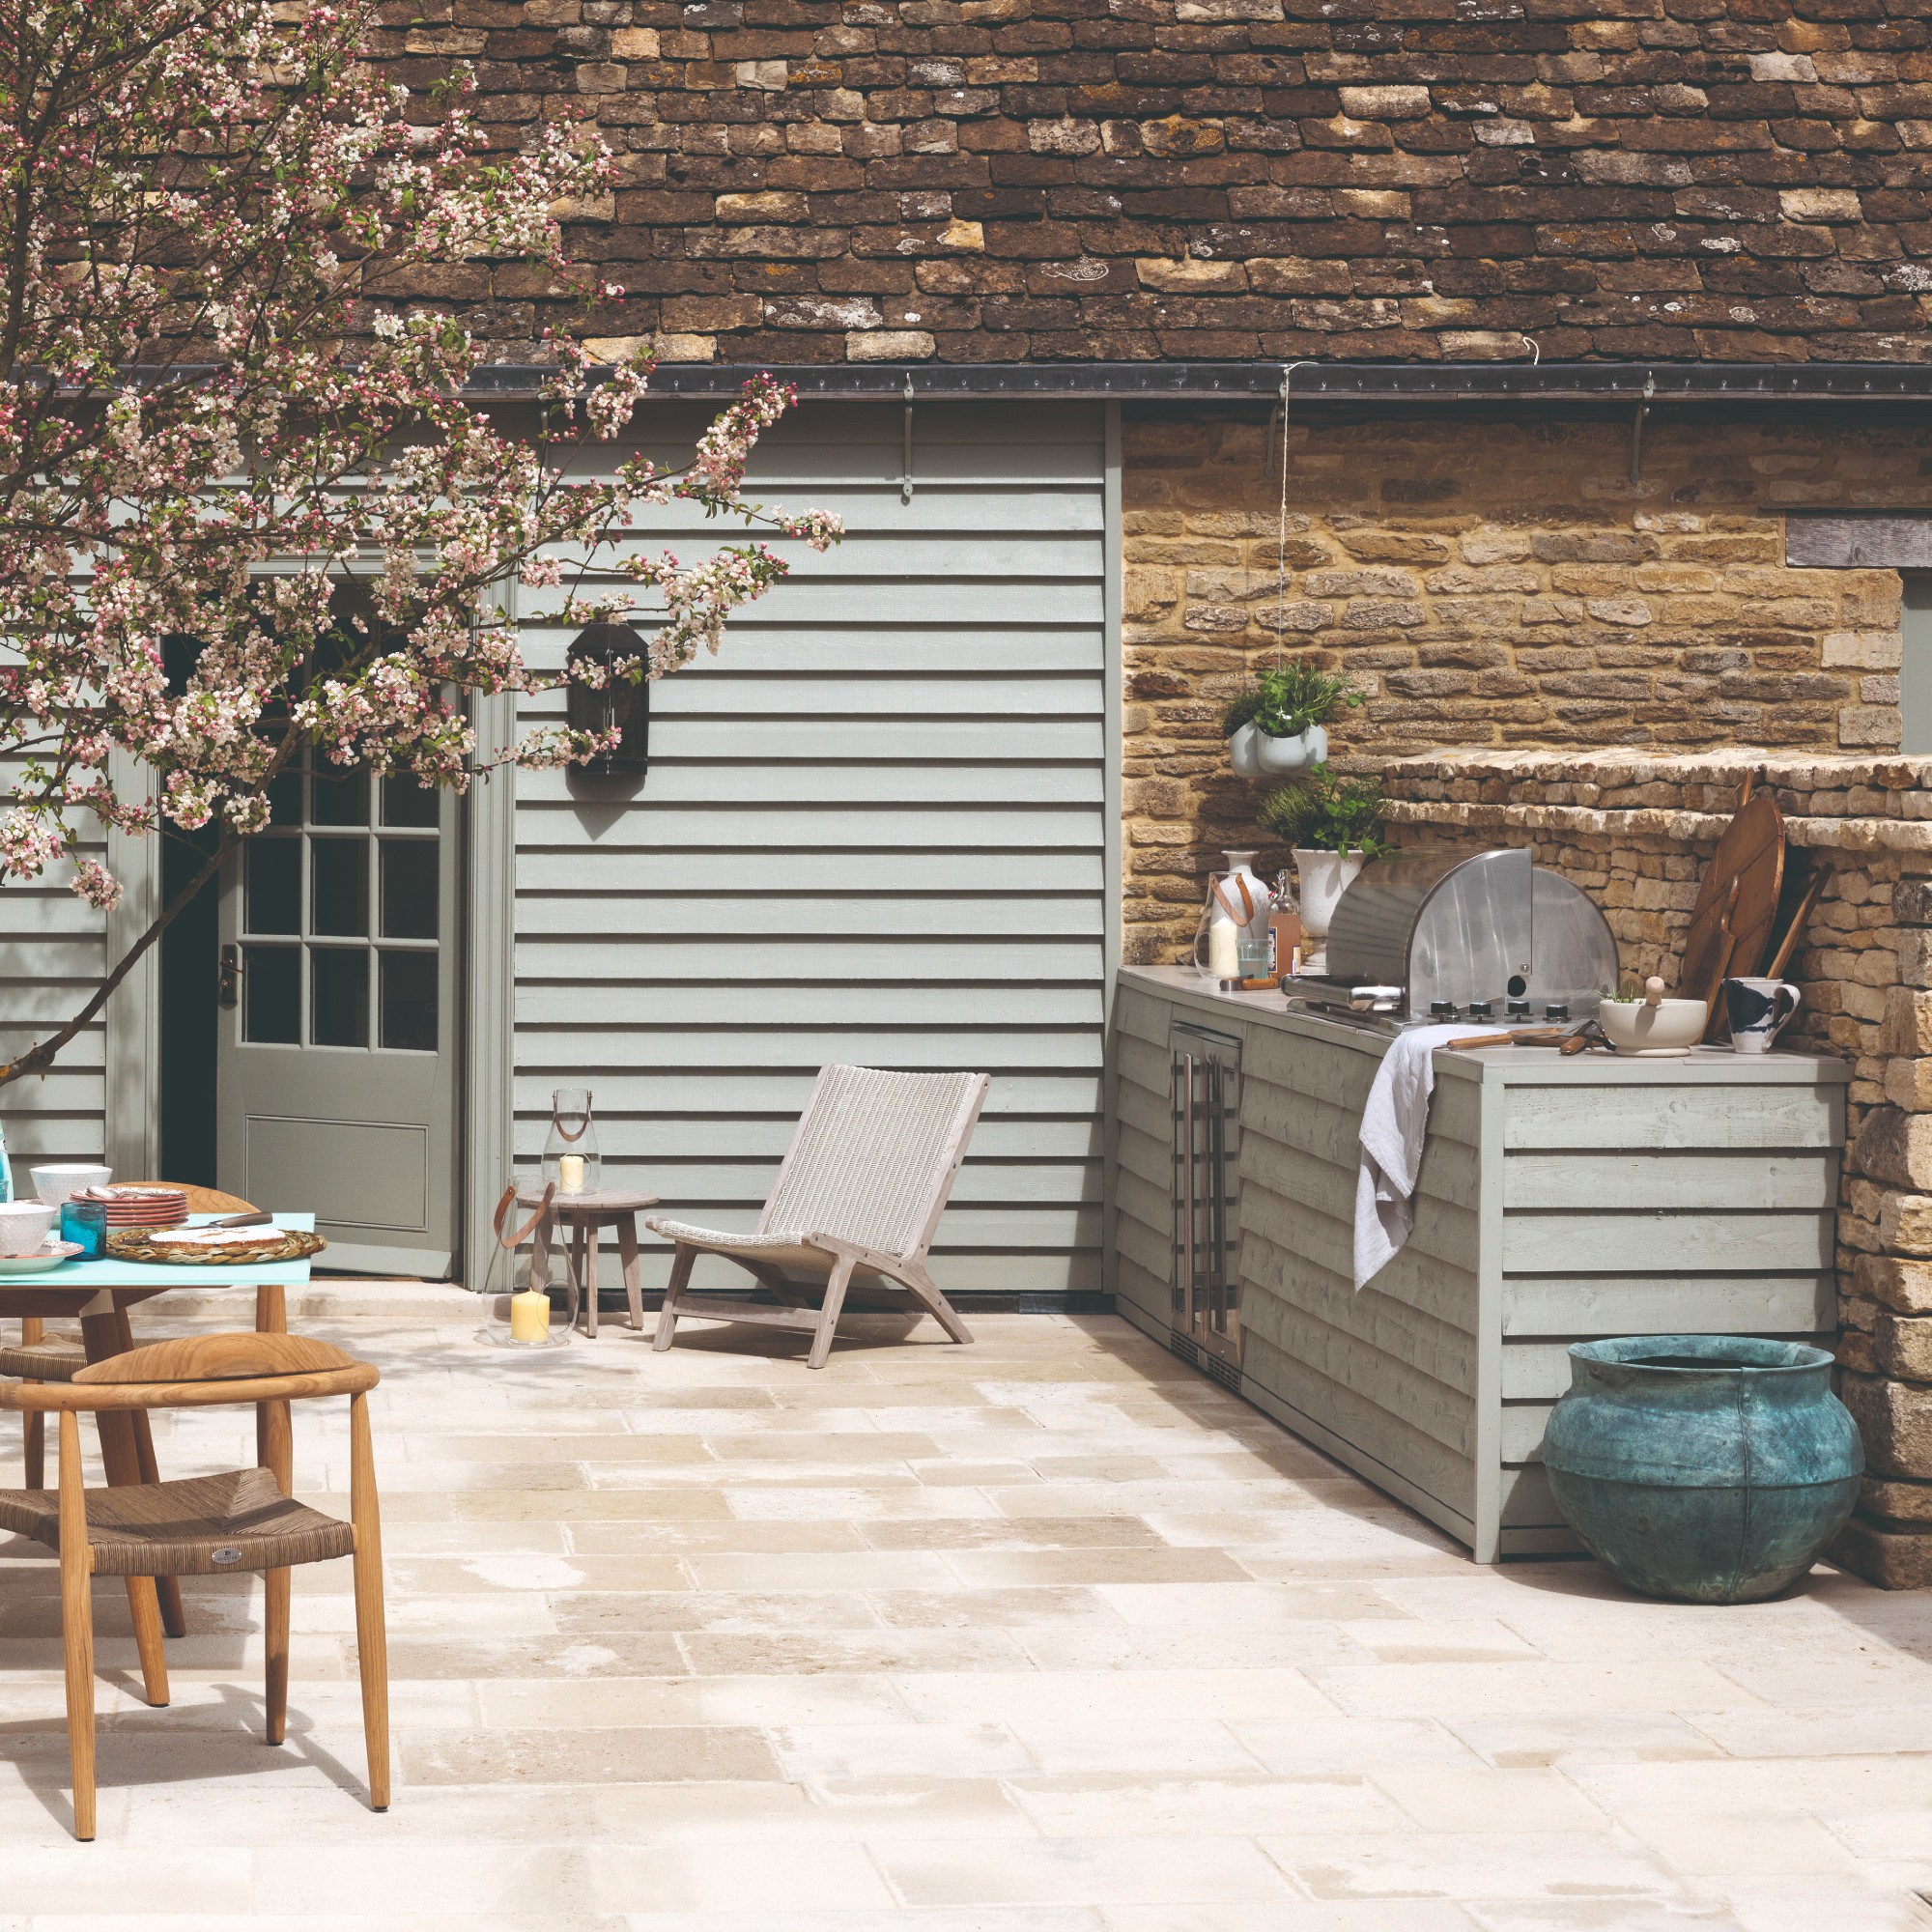 A patio with an outdoor kitchen and a cherry blossom tree